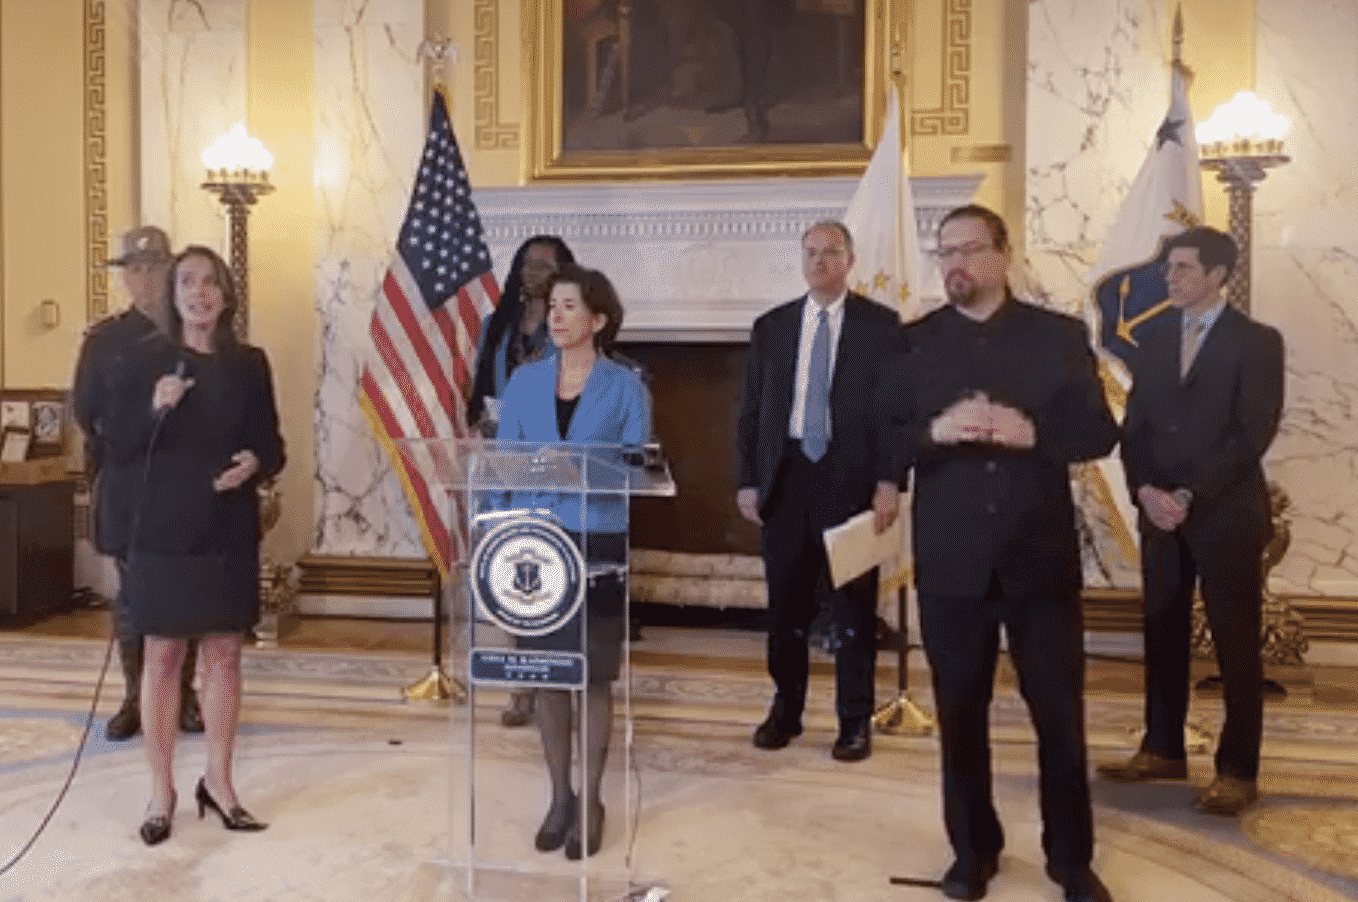 Gov. Gina Raimondo held a press conference March 26, announcing travel from New York state, a disease hotspot, will be screened by RI State Police.